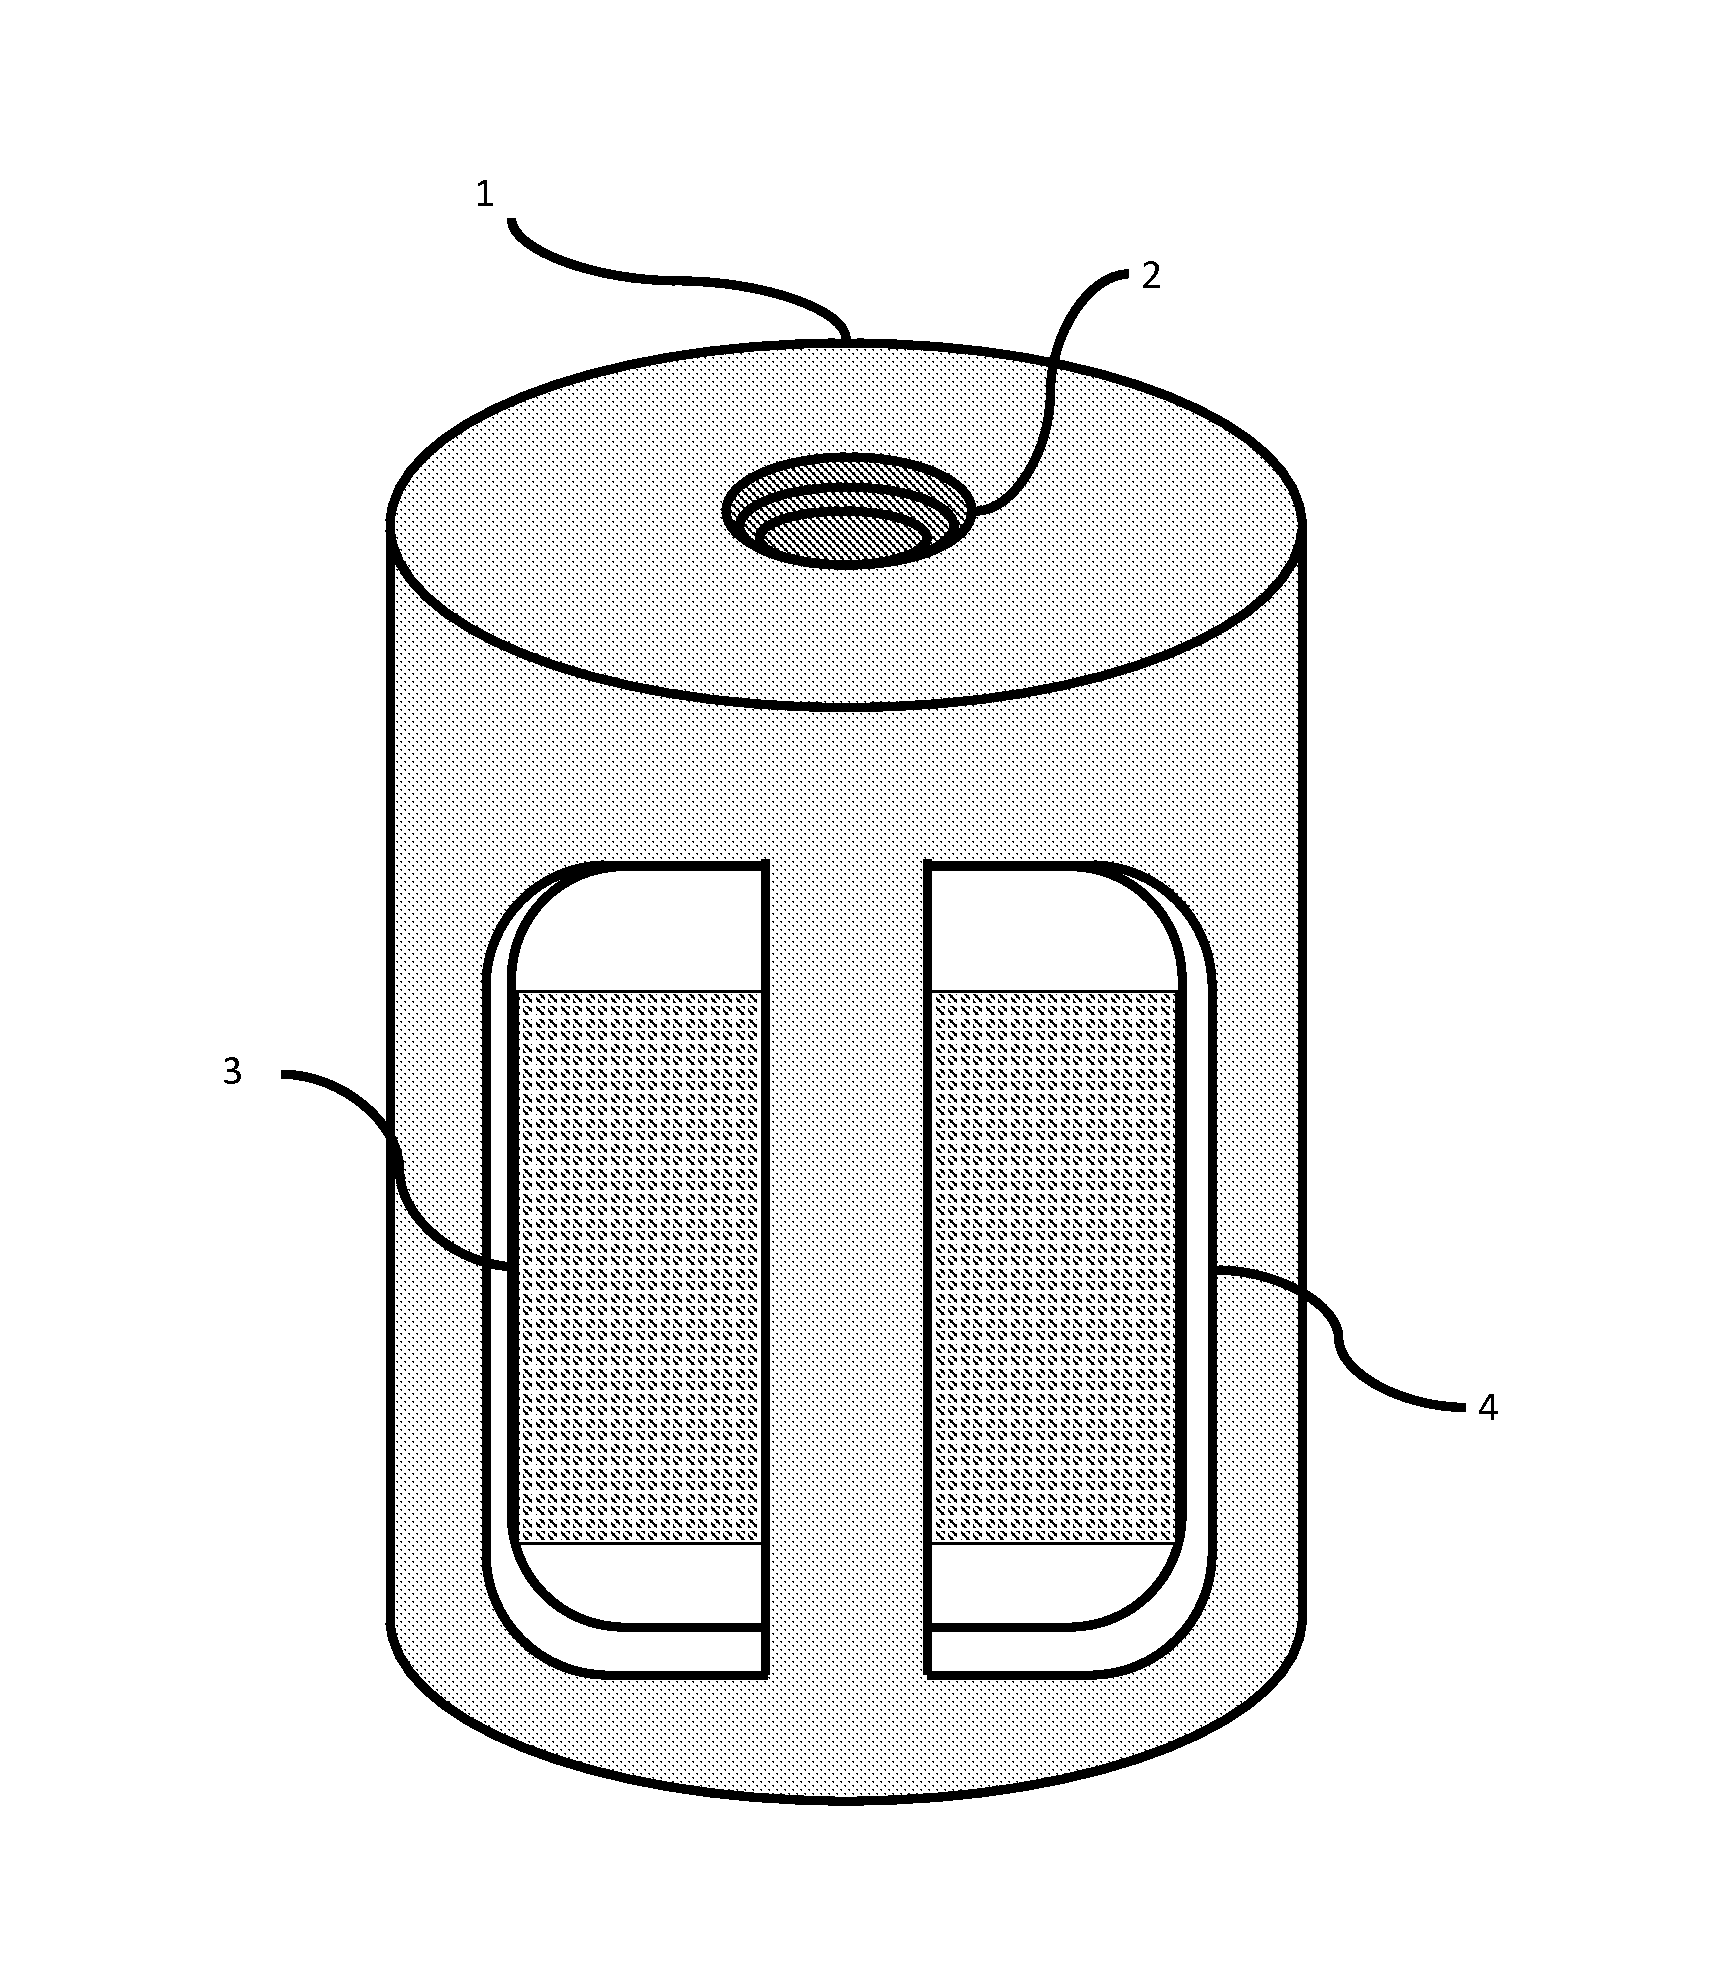 Electrolysis Remediation Device and Method